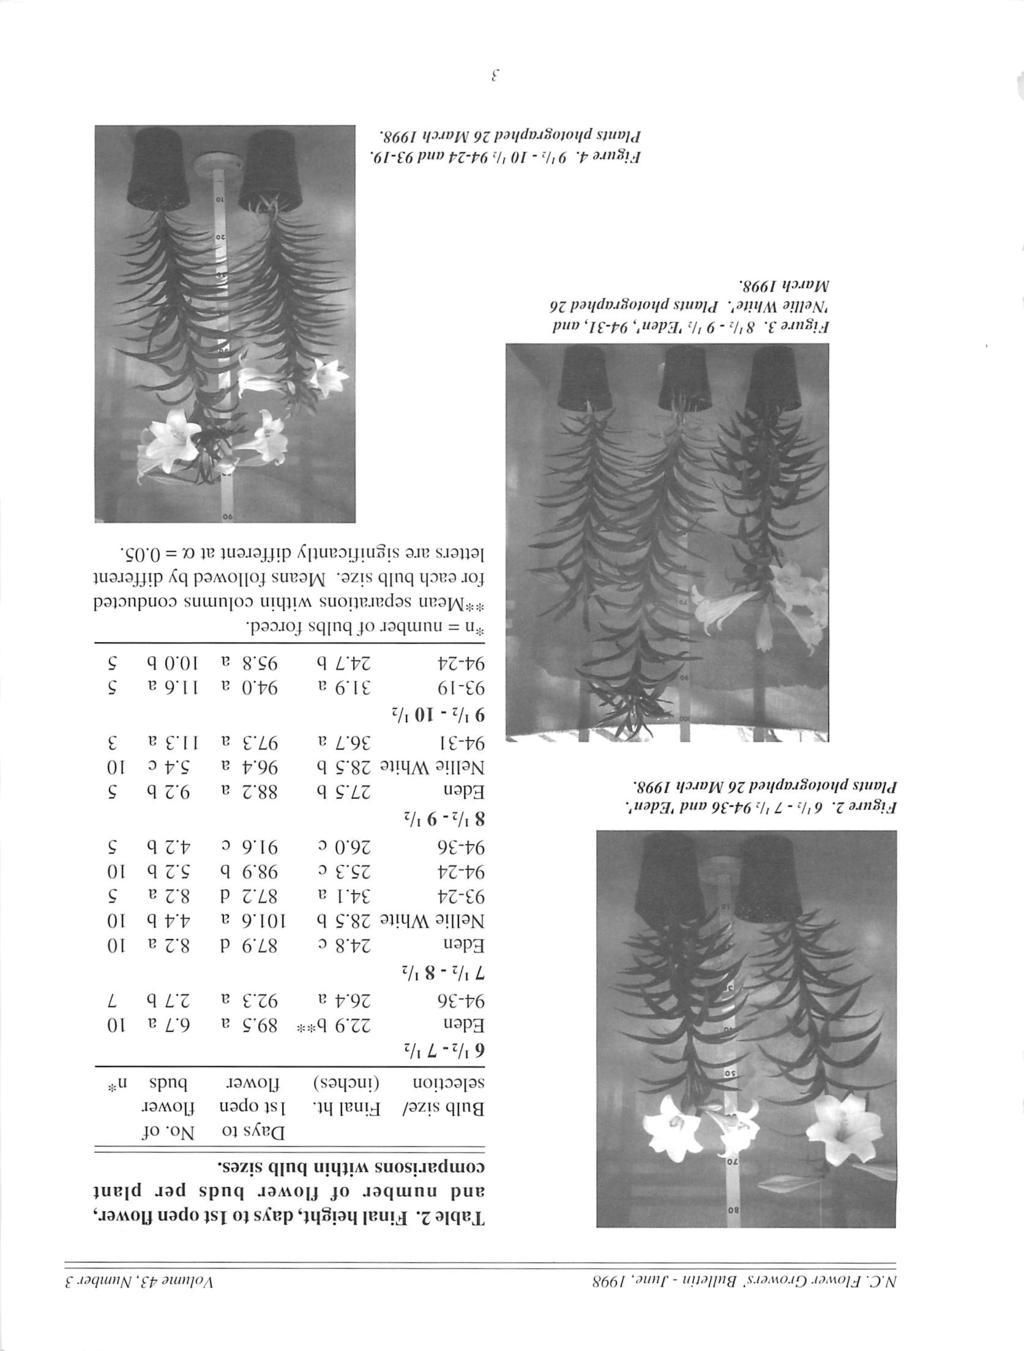 N.C. Flower Growers' Bulletin - June. 1998 Volume 43. Number 3 Table 2. Final height, days to 1st open flower, and number of flower buds per plant comparisons within bulb sizes. Days to No.